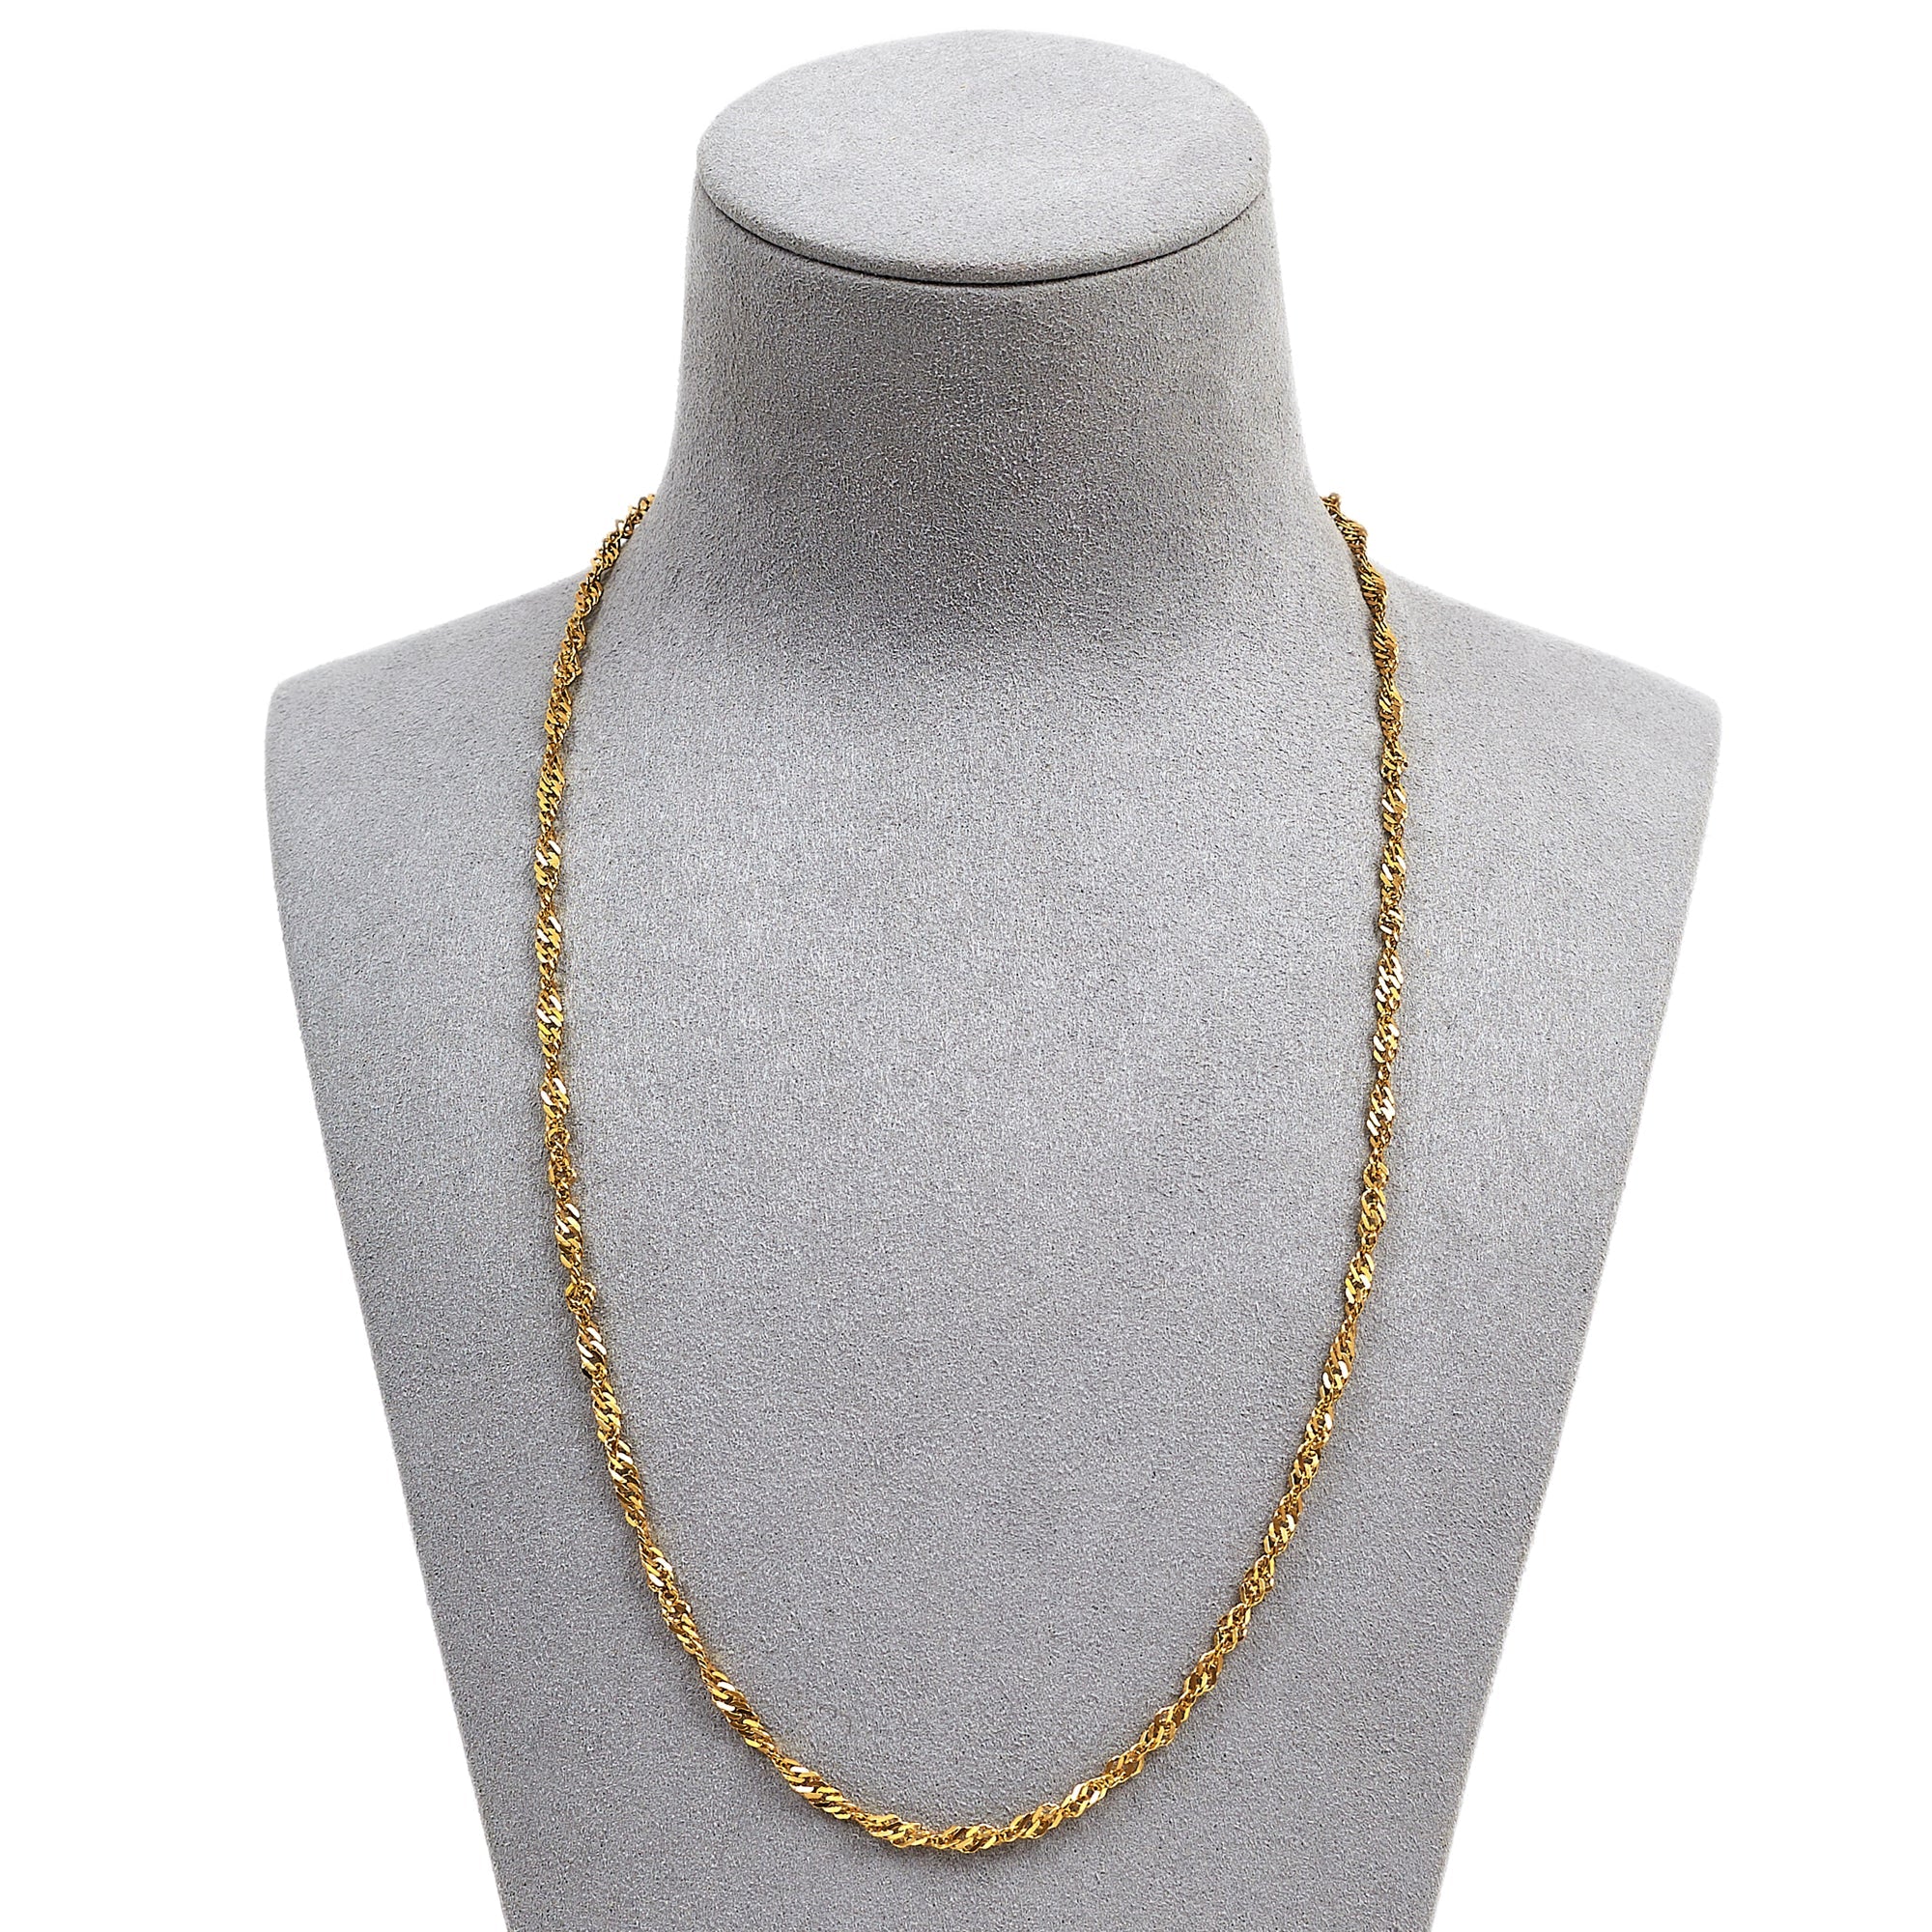 Pre-Owned 22ct Gold Twist Curb Necklace 20 inches